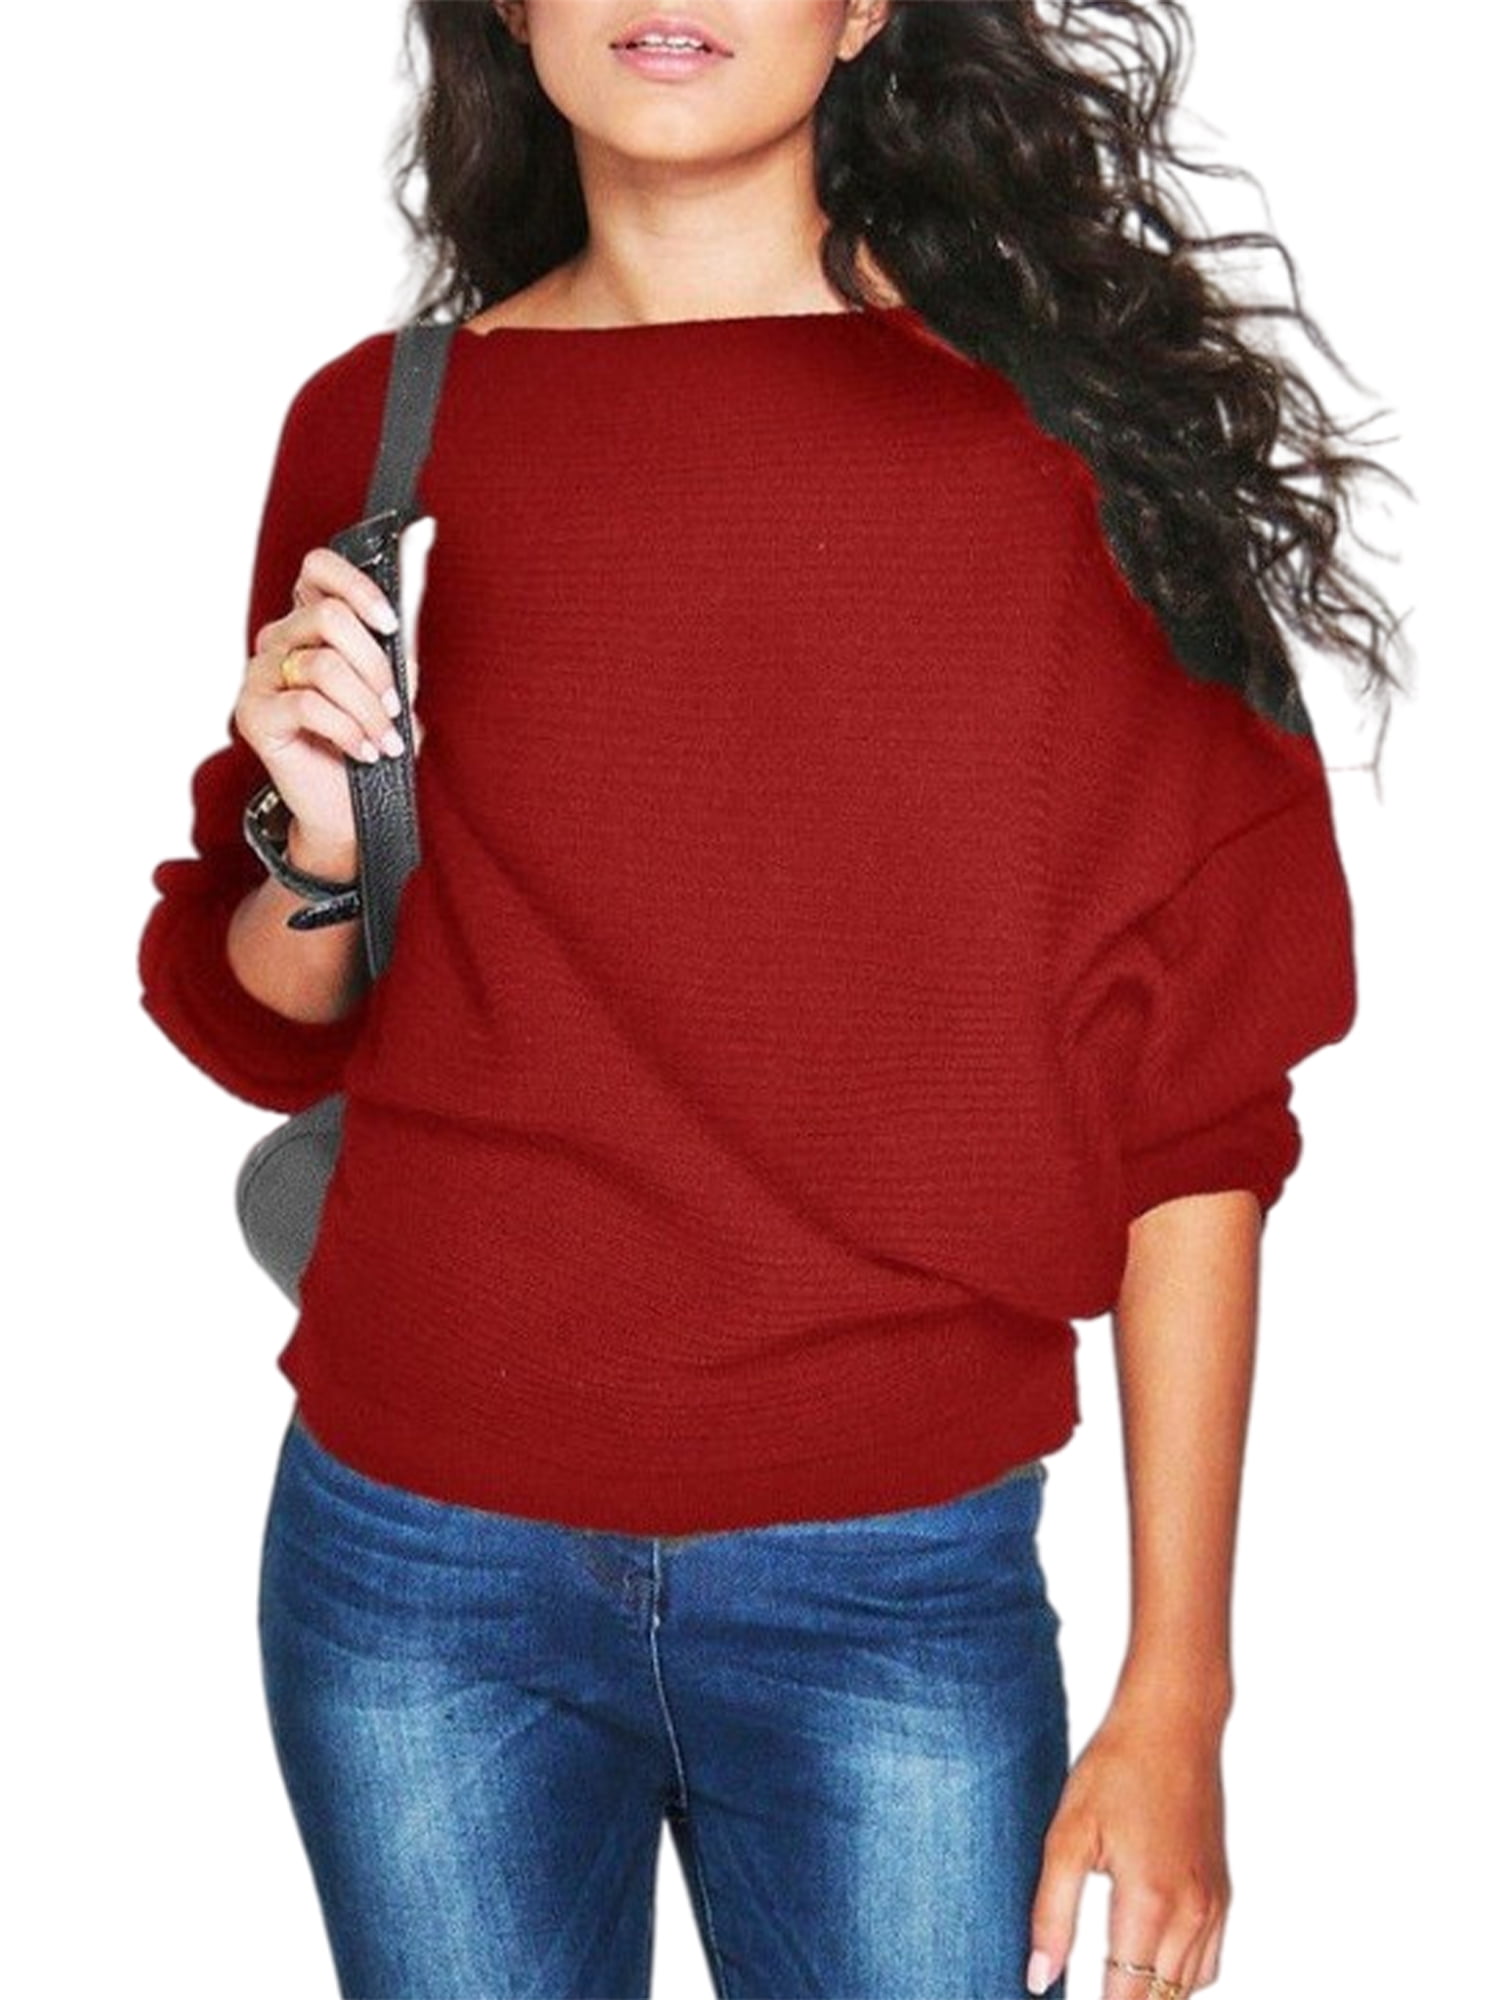 Avamo Boat Neck Batwing Sleeves Dolman Solid Color Knitted Sweaters and Pullovers  Tops for Women - Walmart.com